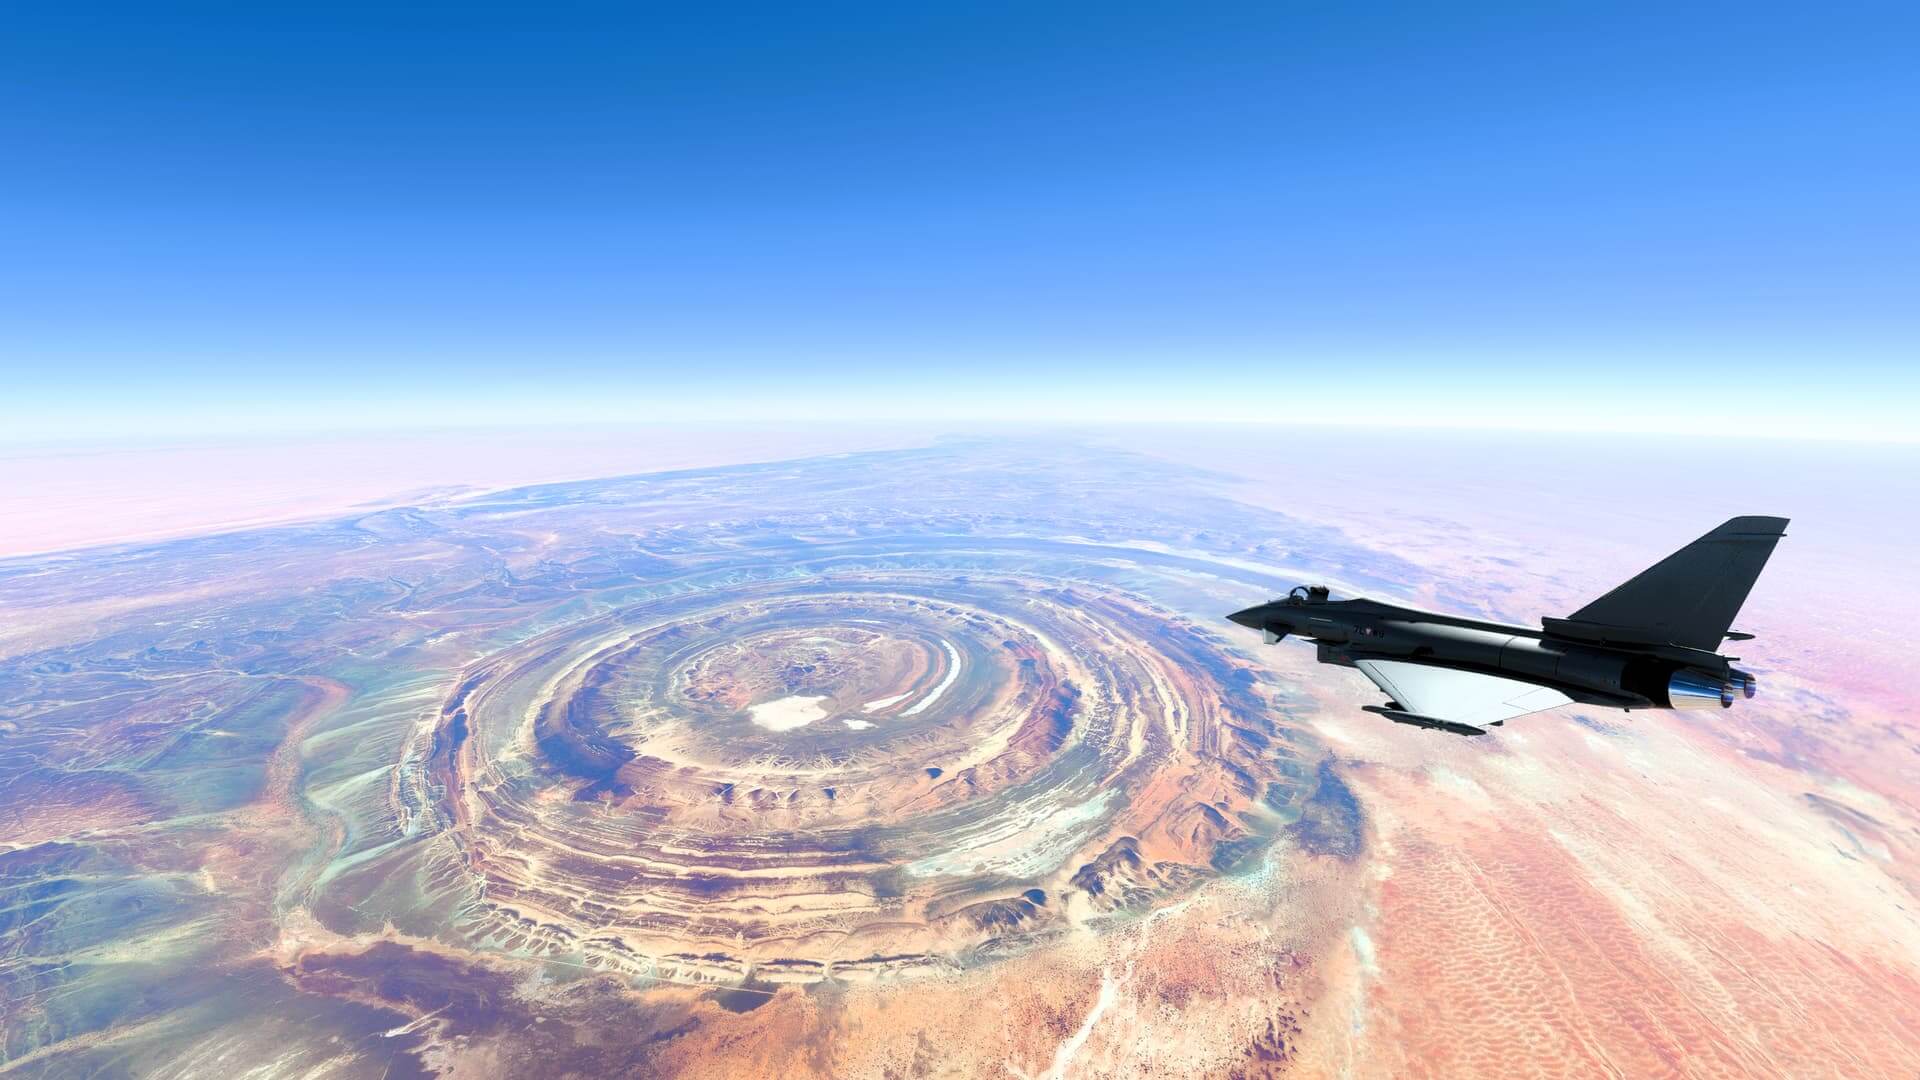 A Eurofighter Typhoon cruises in clear skies above a vast desert